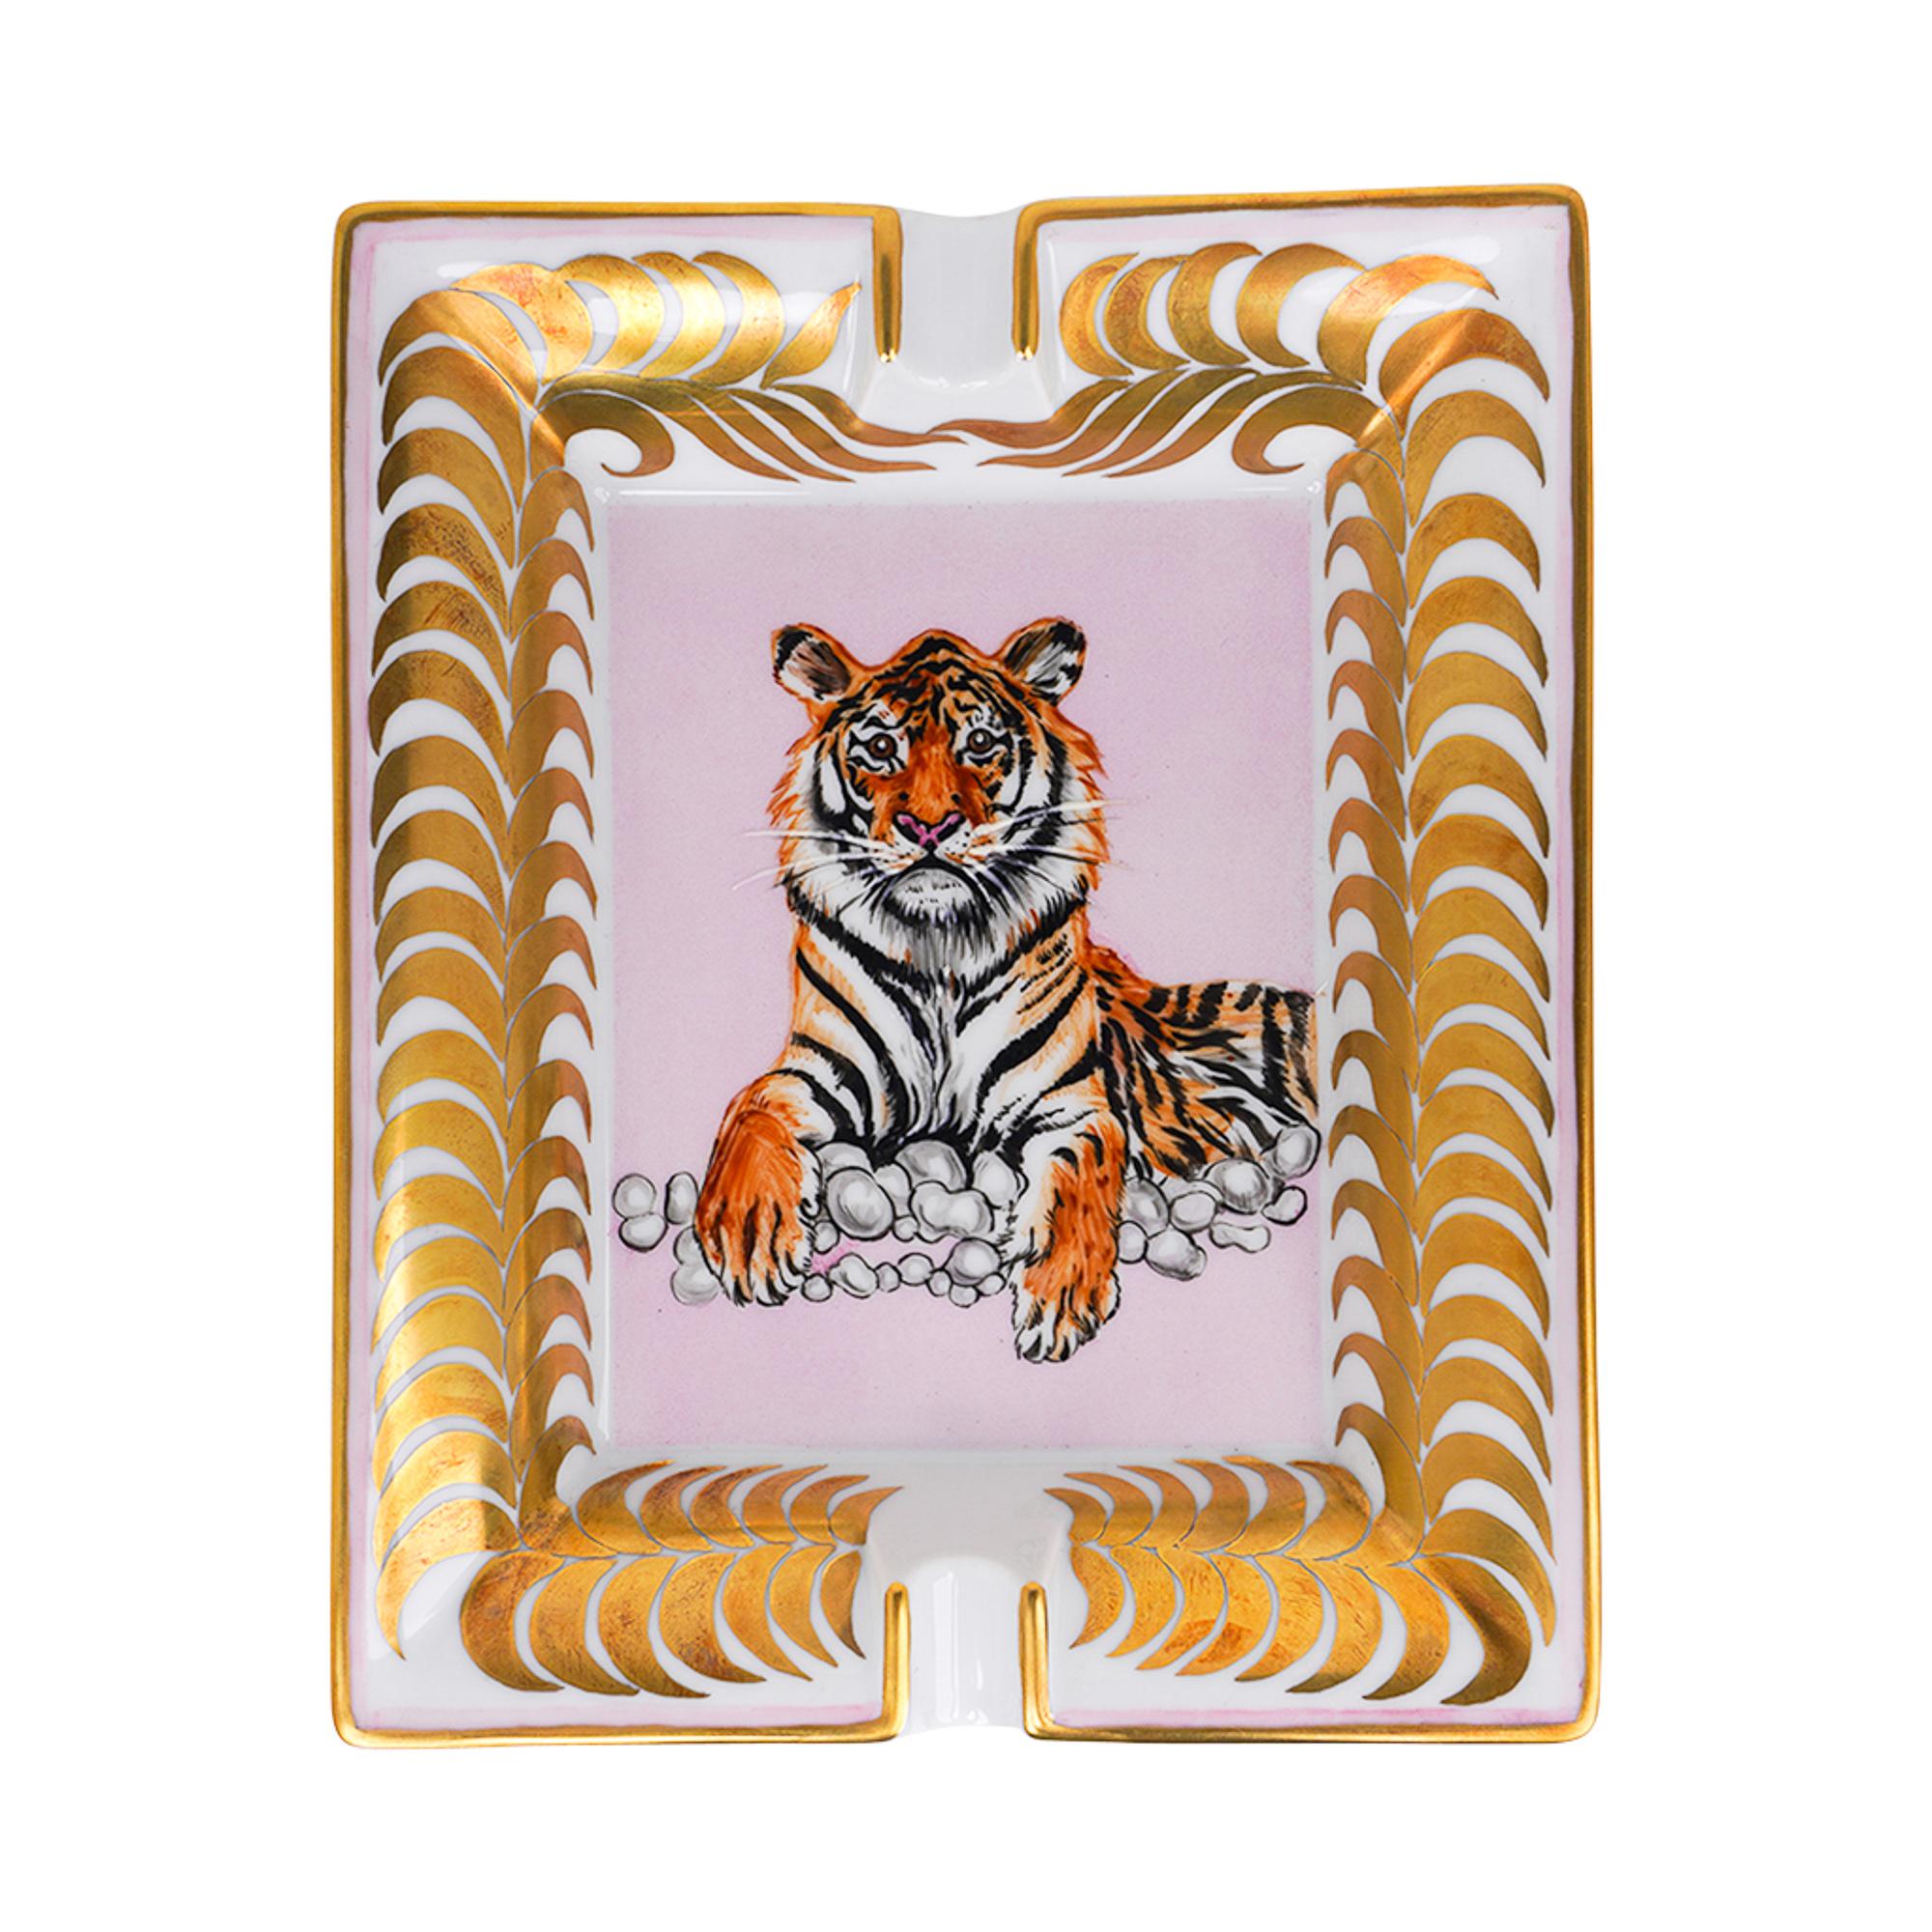 Hermes Change Tray Tigre Royal Or / Rose Hand Painted New w/ Box For Sale 2